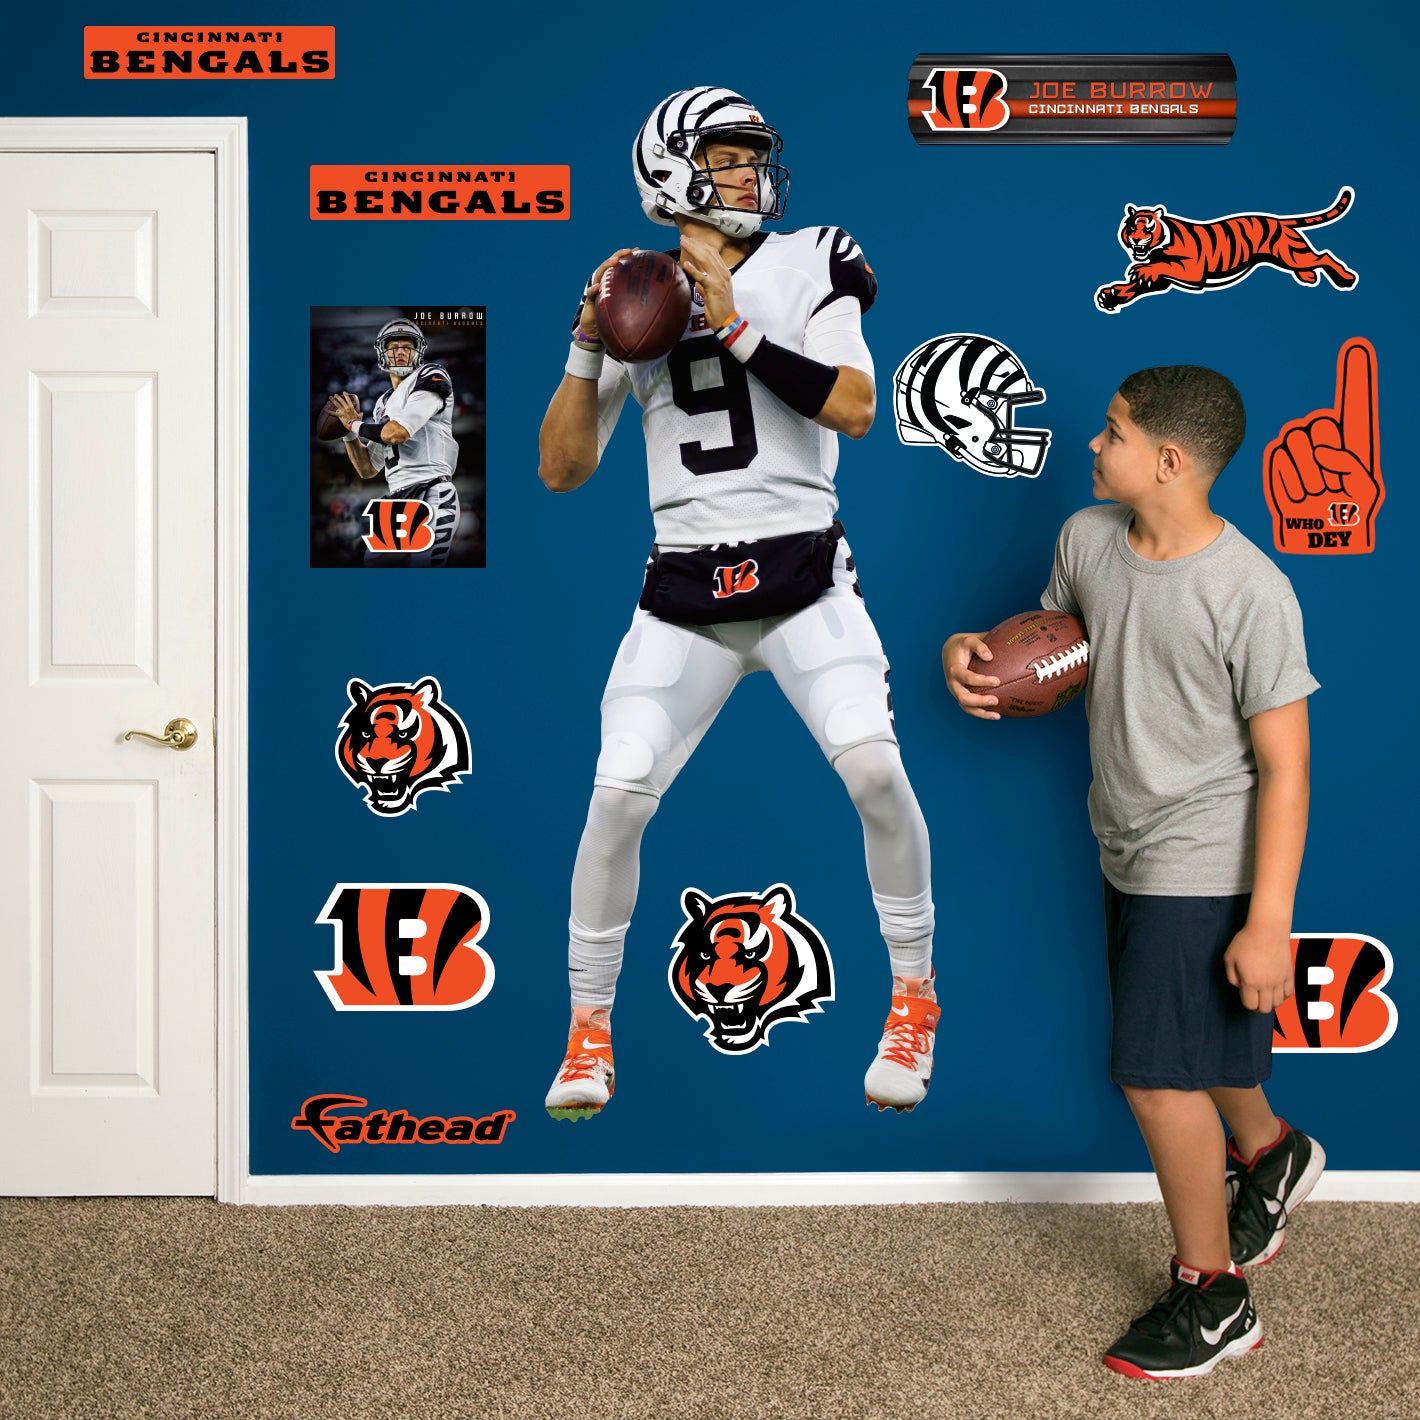 Cincinnati Bengals: Joe Burrow 2022 White Uniform - Officially Licensed NFL  Removable Adhesive Decal